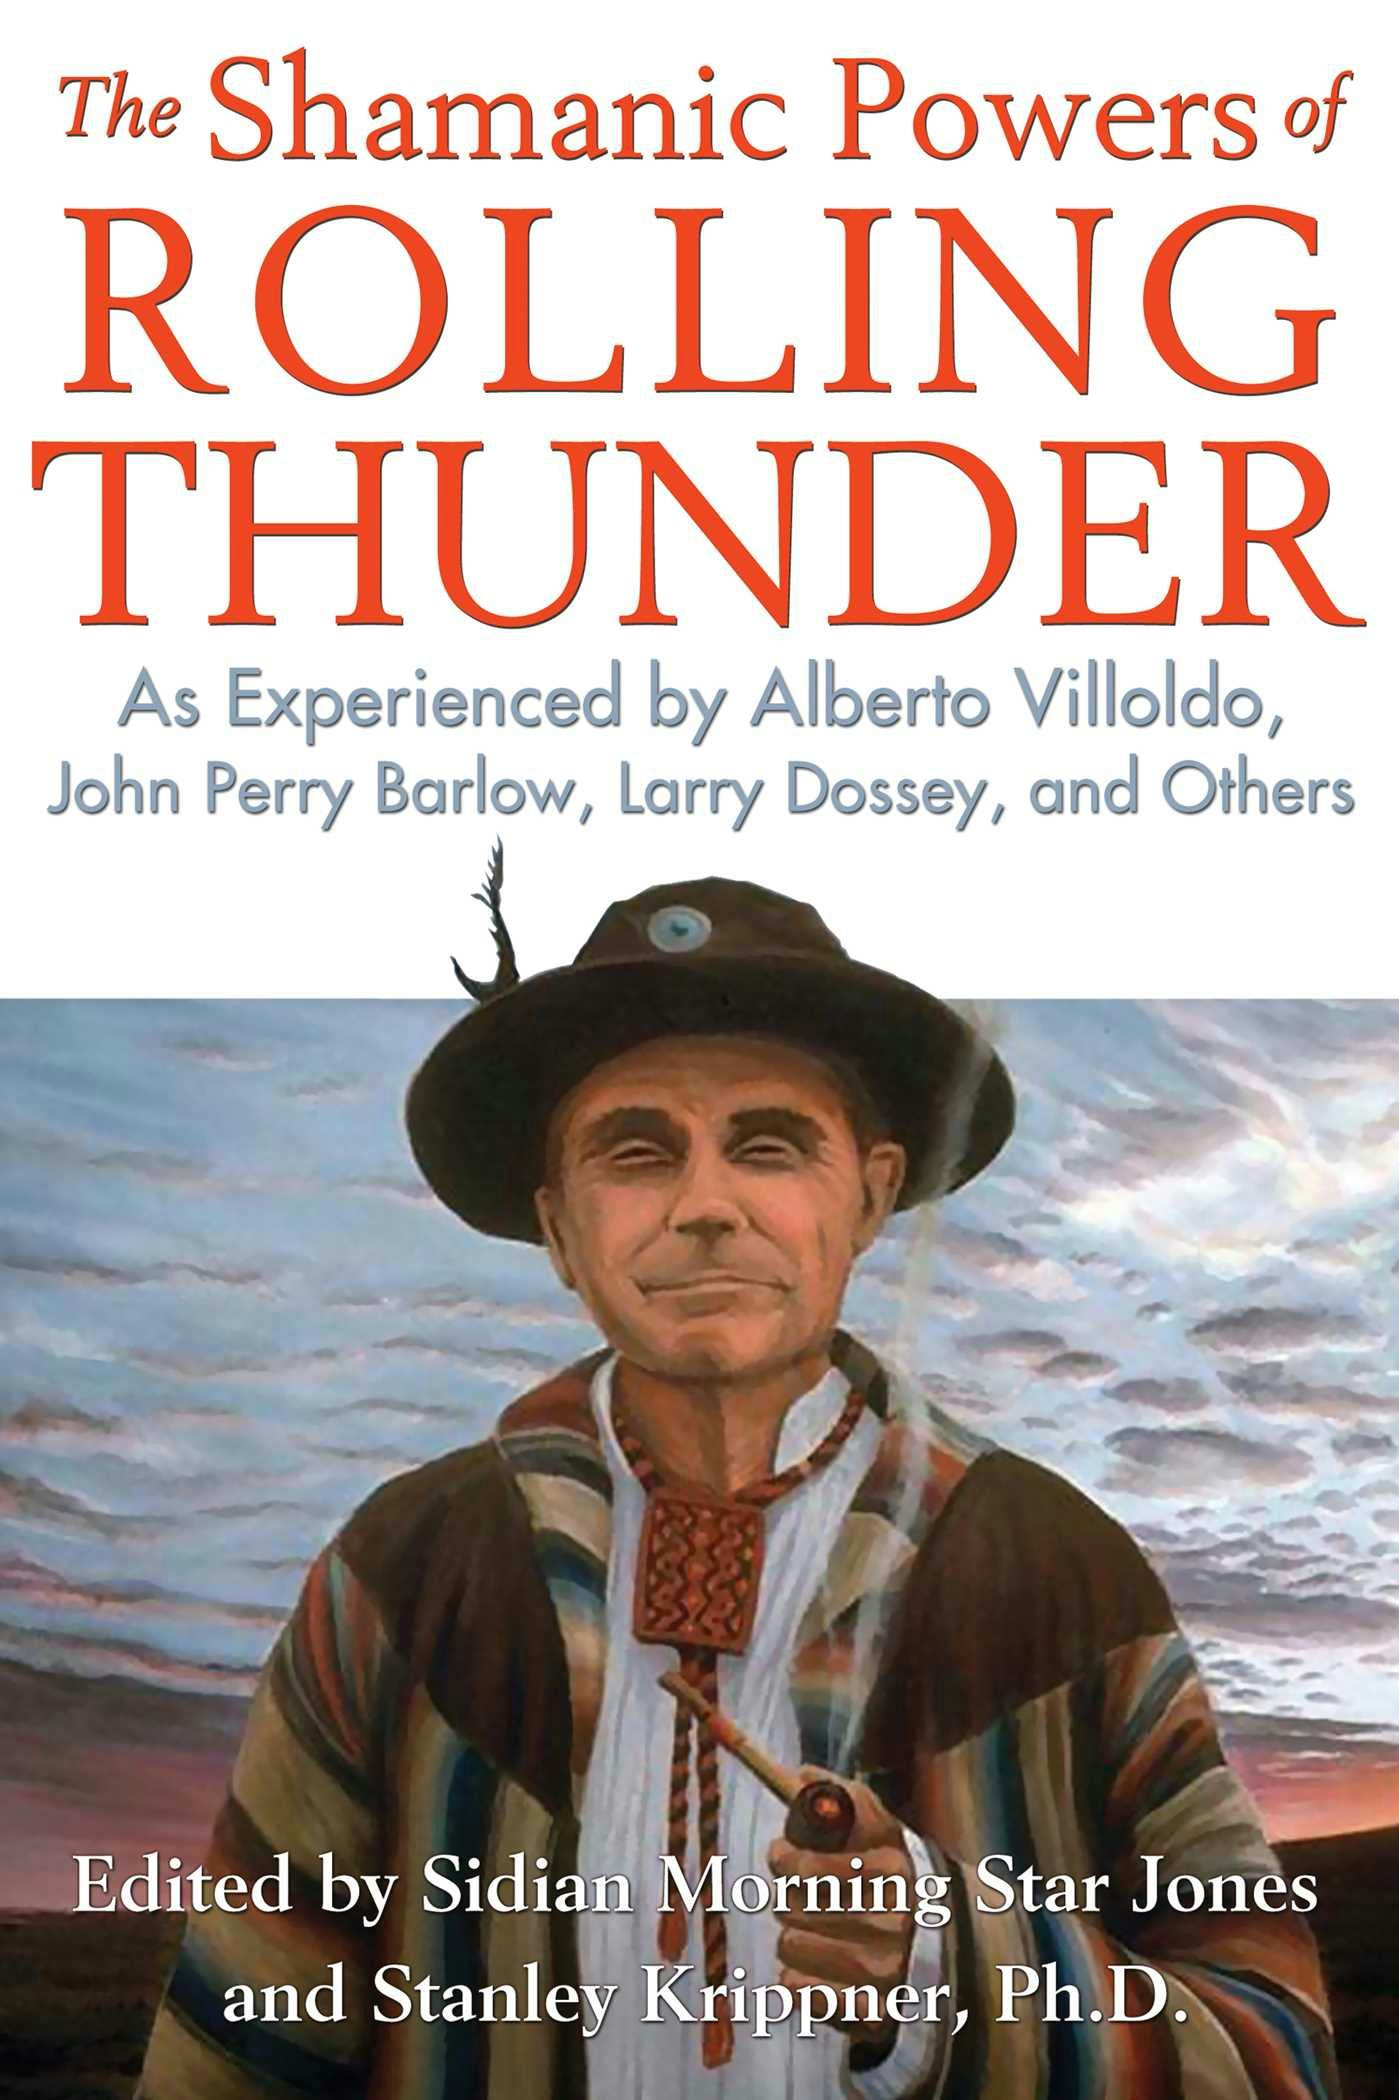 The Shamanic Powers of Rolling Thunder: As Experienced by Alberto Villoldo, John Perry Barlow, Larry Dossey, and Others - undefined